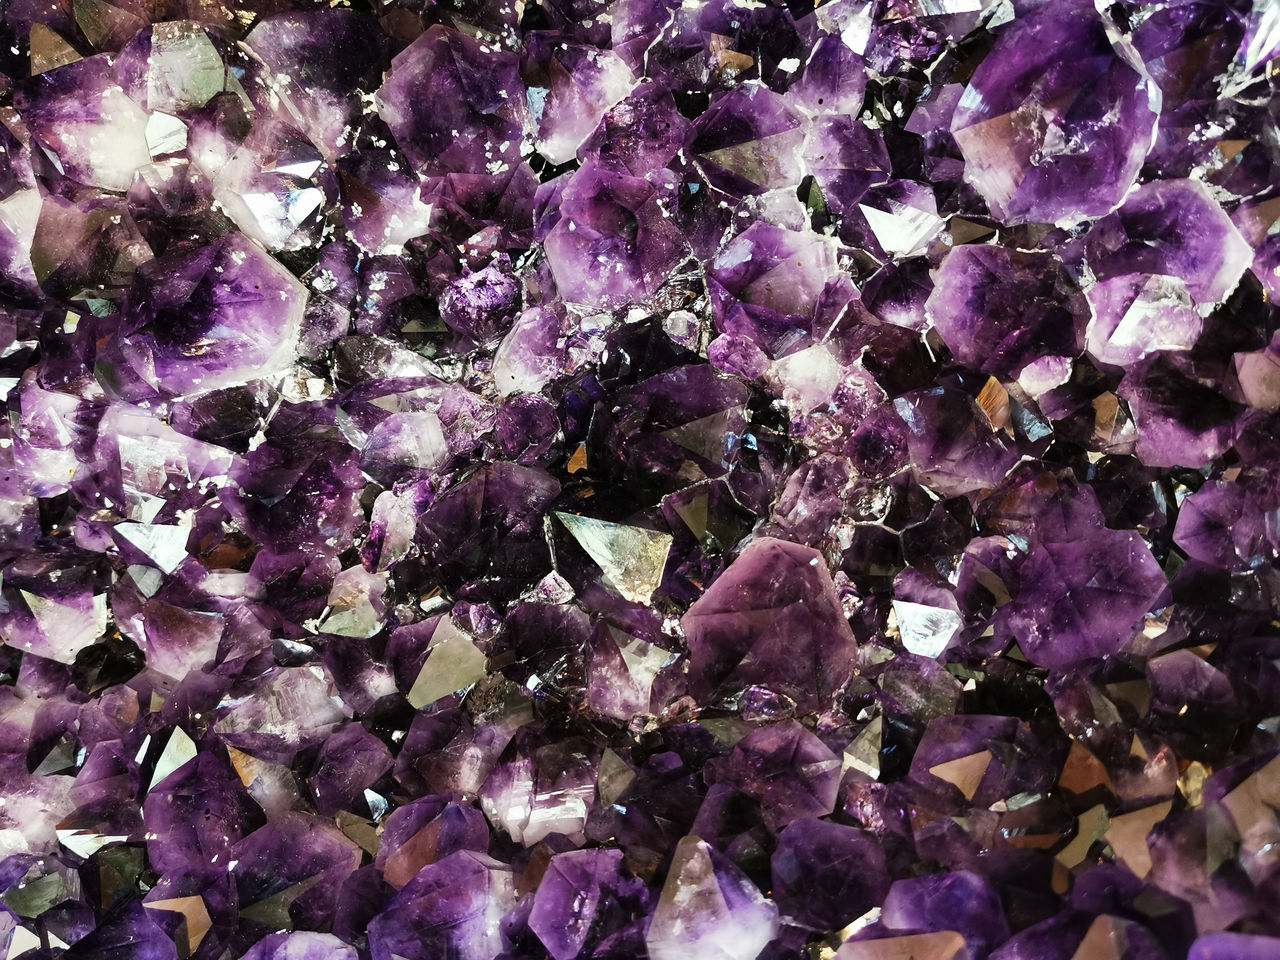 purple, amethyst, full frame, backgrounds, lilac, violet, lavender, flower, petal, no people, close-up, gemstone, mineral, nature, jewelry, plant, jewellery, crystal, fashion accessory, beauty in nature, textured, abundance, pattern, outdoors